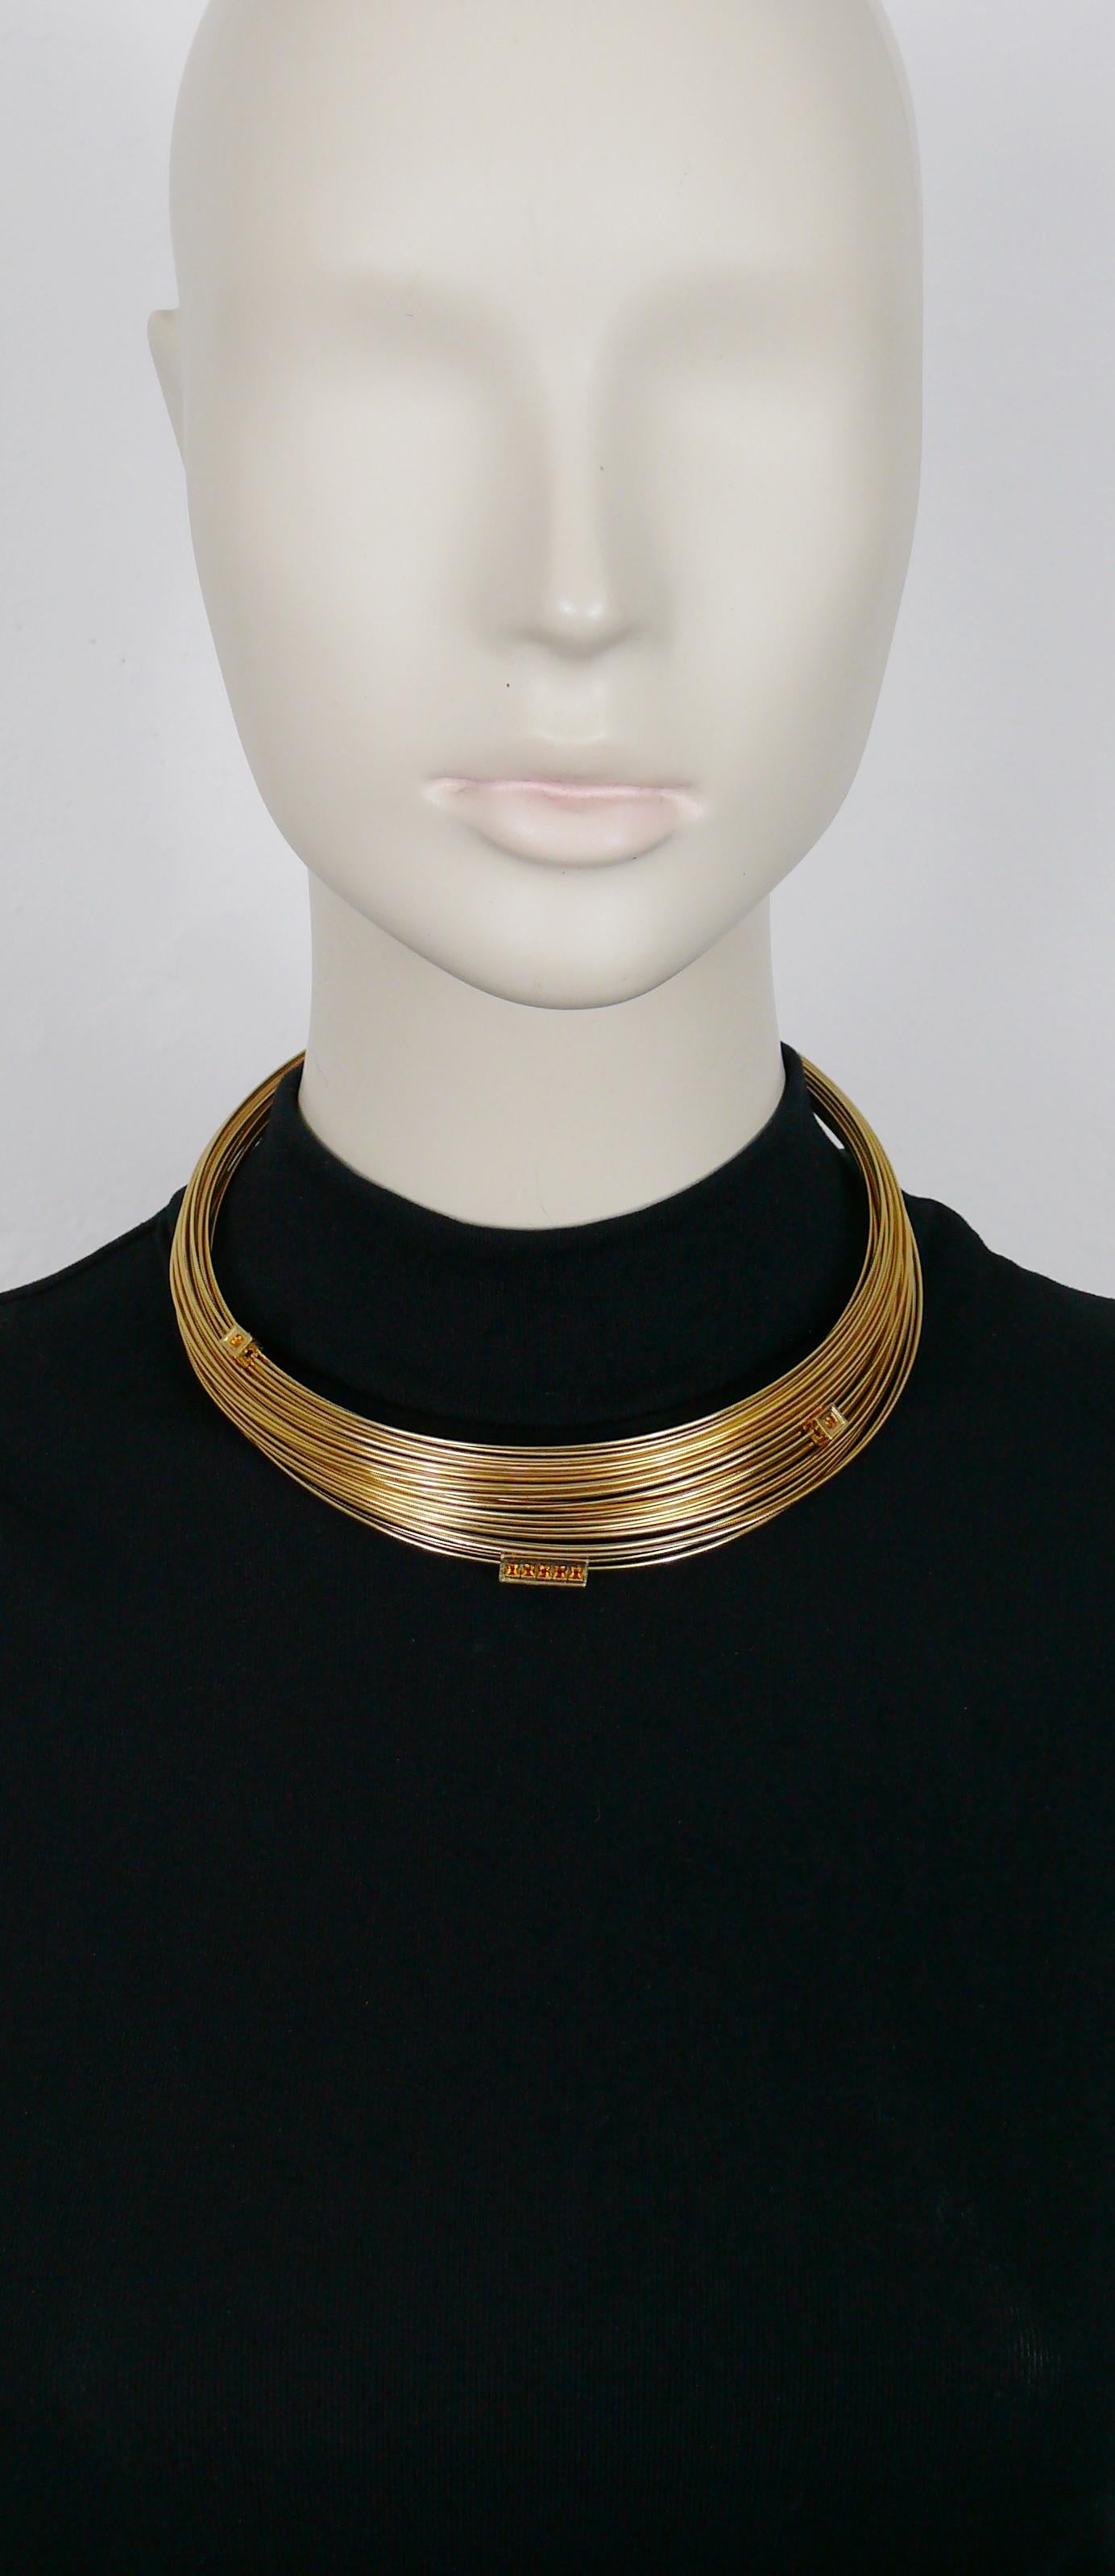 THIERRY MUGLER gold toned choker necklace made of bundled wires and featuring mobile elements embellished with orange crystals.

Embossed TM.

Indicative measurements : circumference approx. 41.15 cm (16.20 inches).

NOTES
- This is a preloved